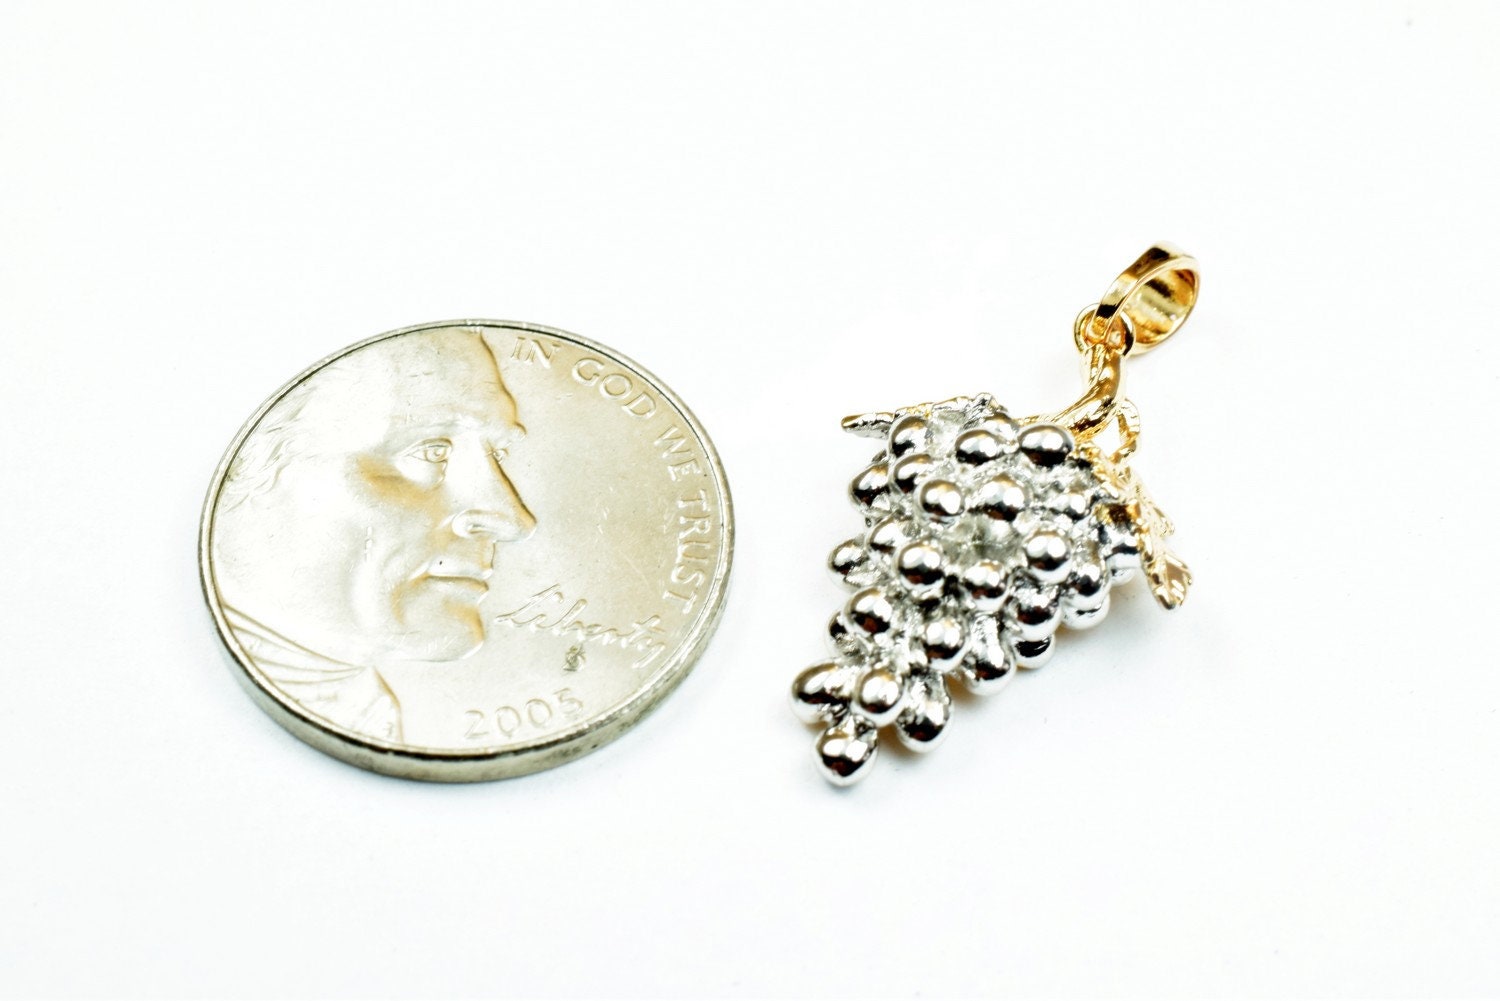 18K as Gold Filled* Bunch of Grapes Pendant Charm Size 23x15mm as Gold Filled* Pendant For Jewelry Making GP148